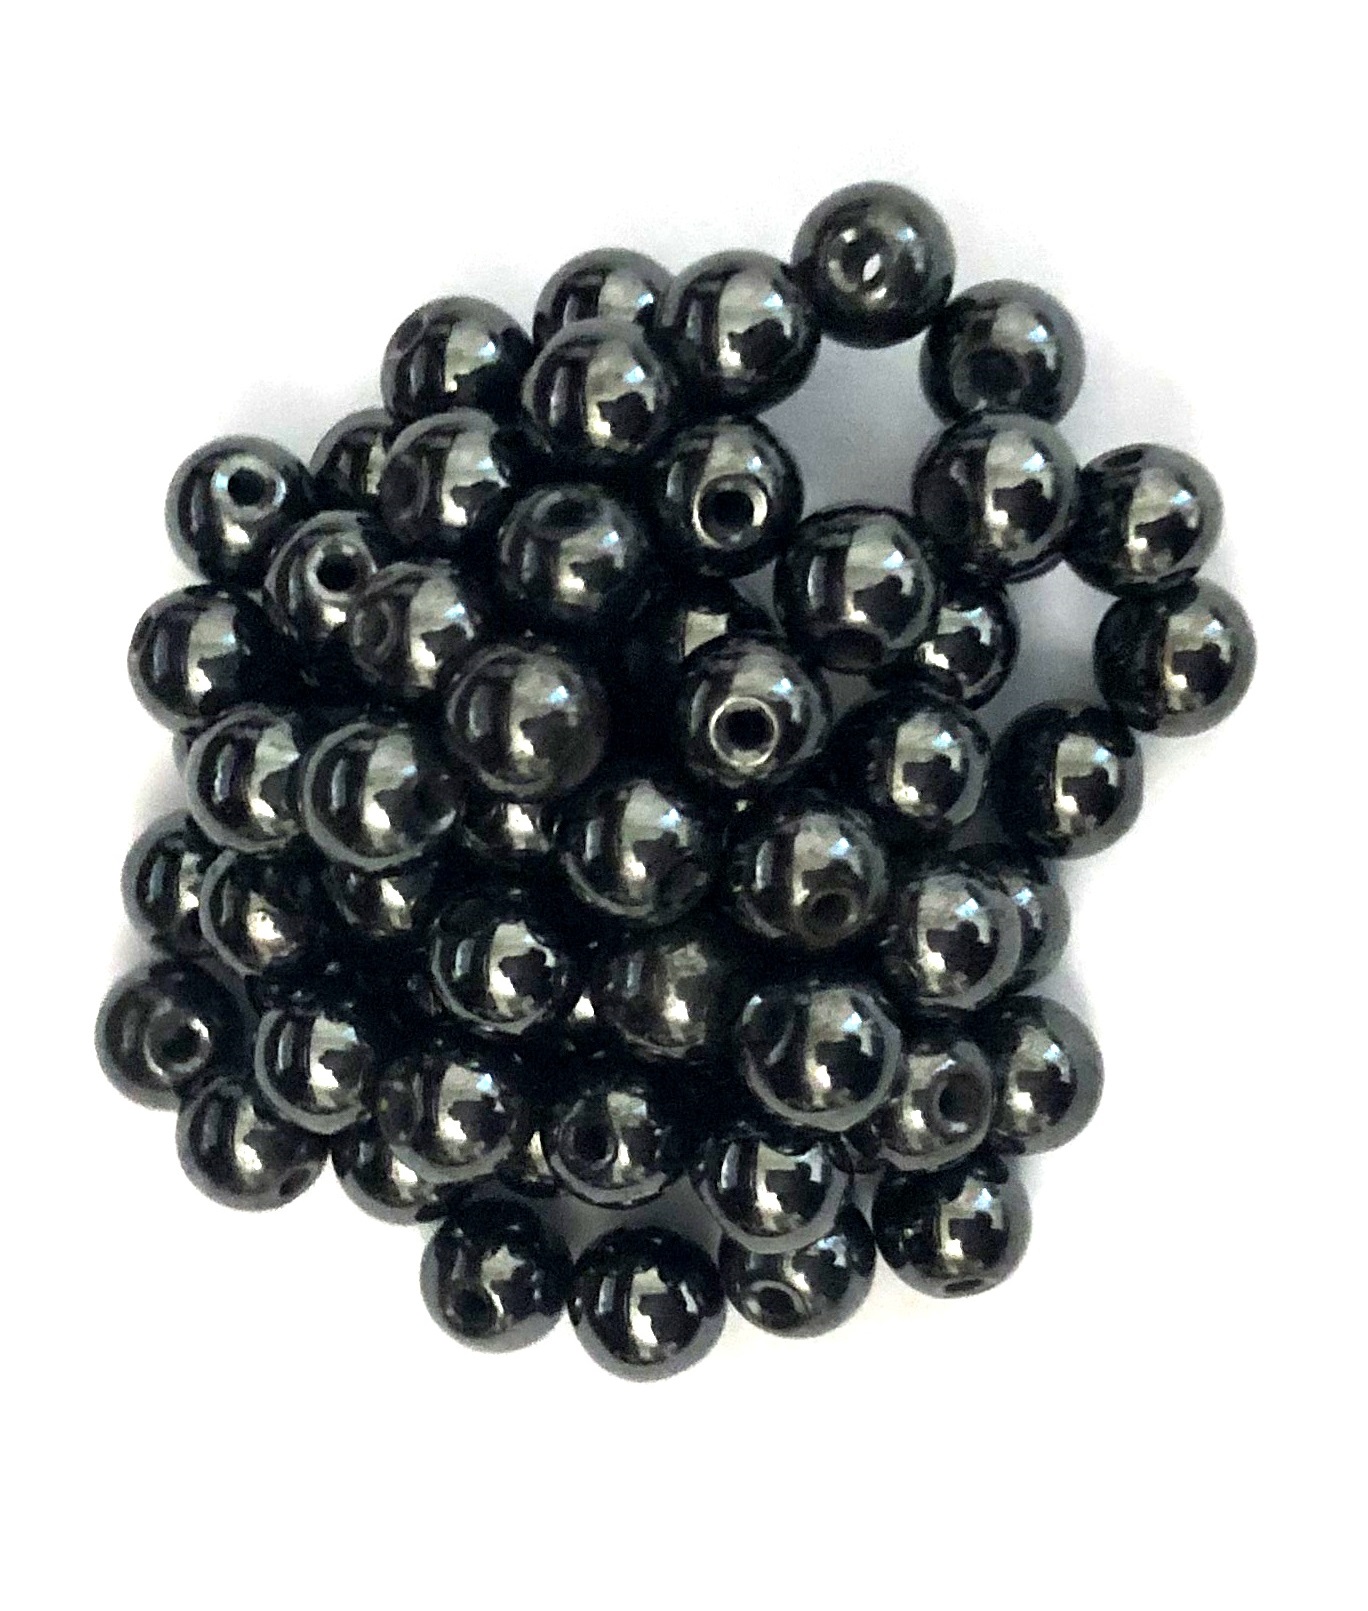 1 Bags (750 PC.) 5x6mm Ball Magnetic Beads #MB-R5x6